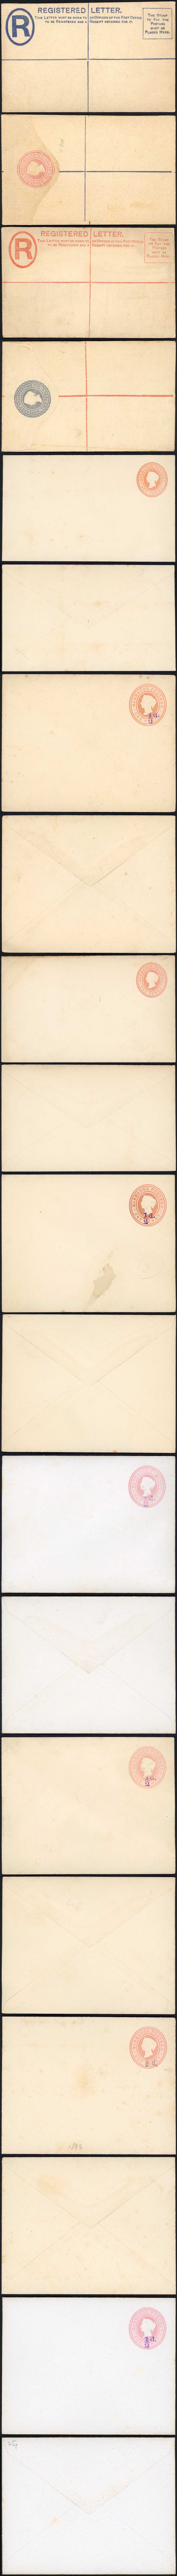 Barbados QV Postal Stationery envelopes mint group - Picture 1 of 1